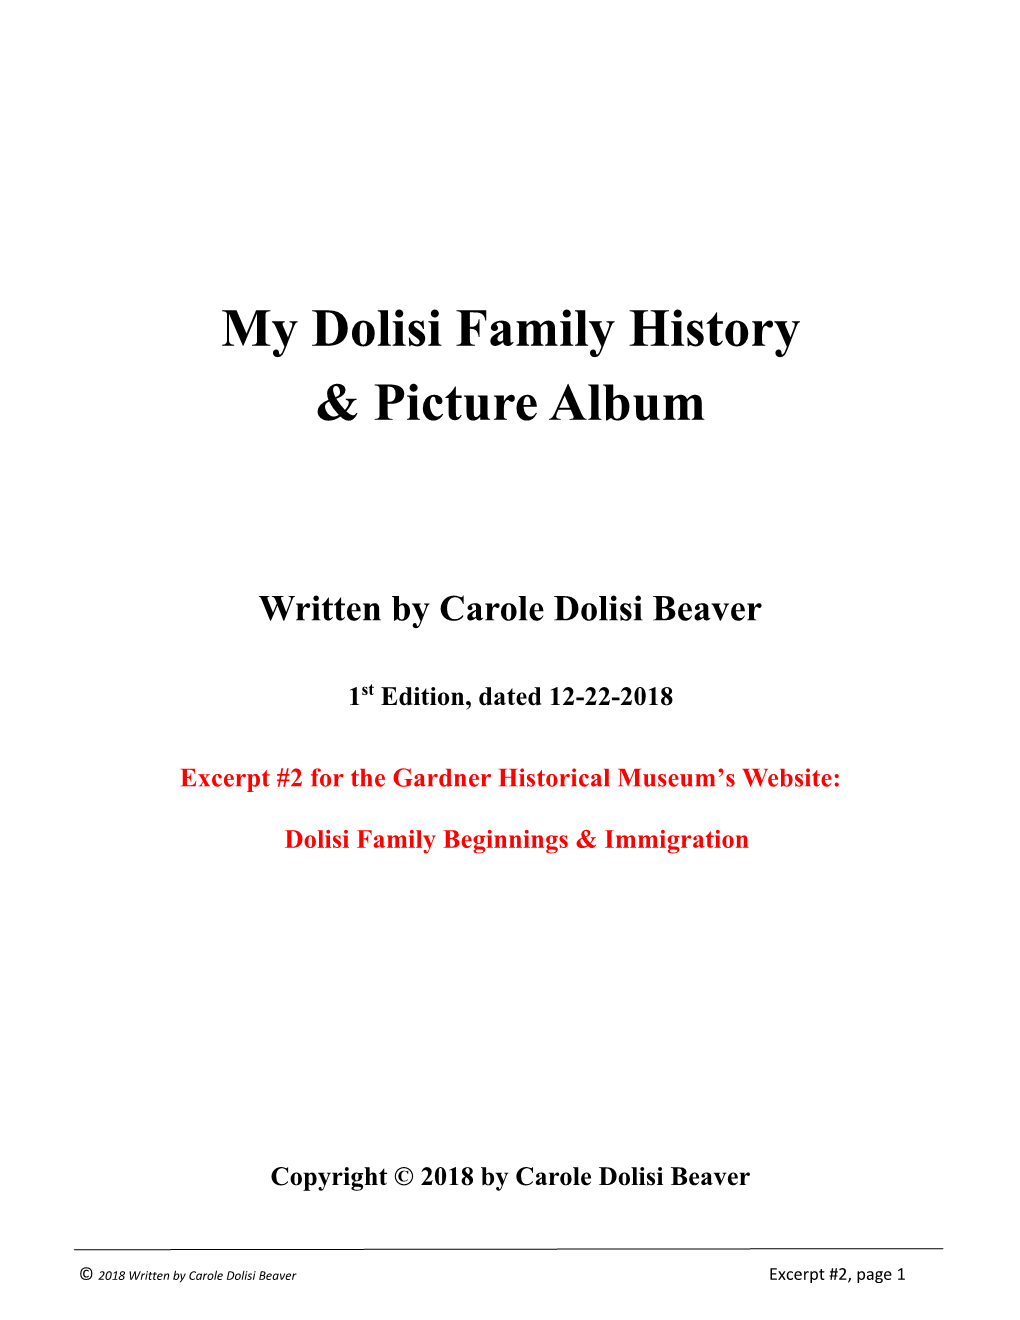 My Dolisi Family History & Picture Album